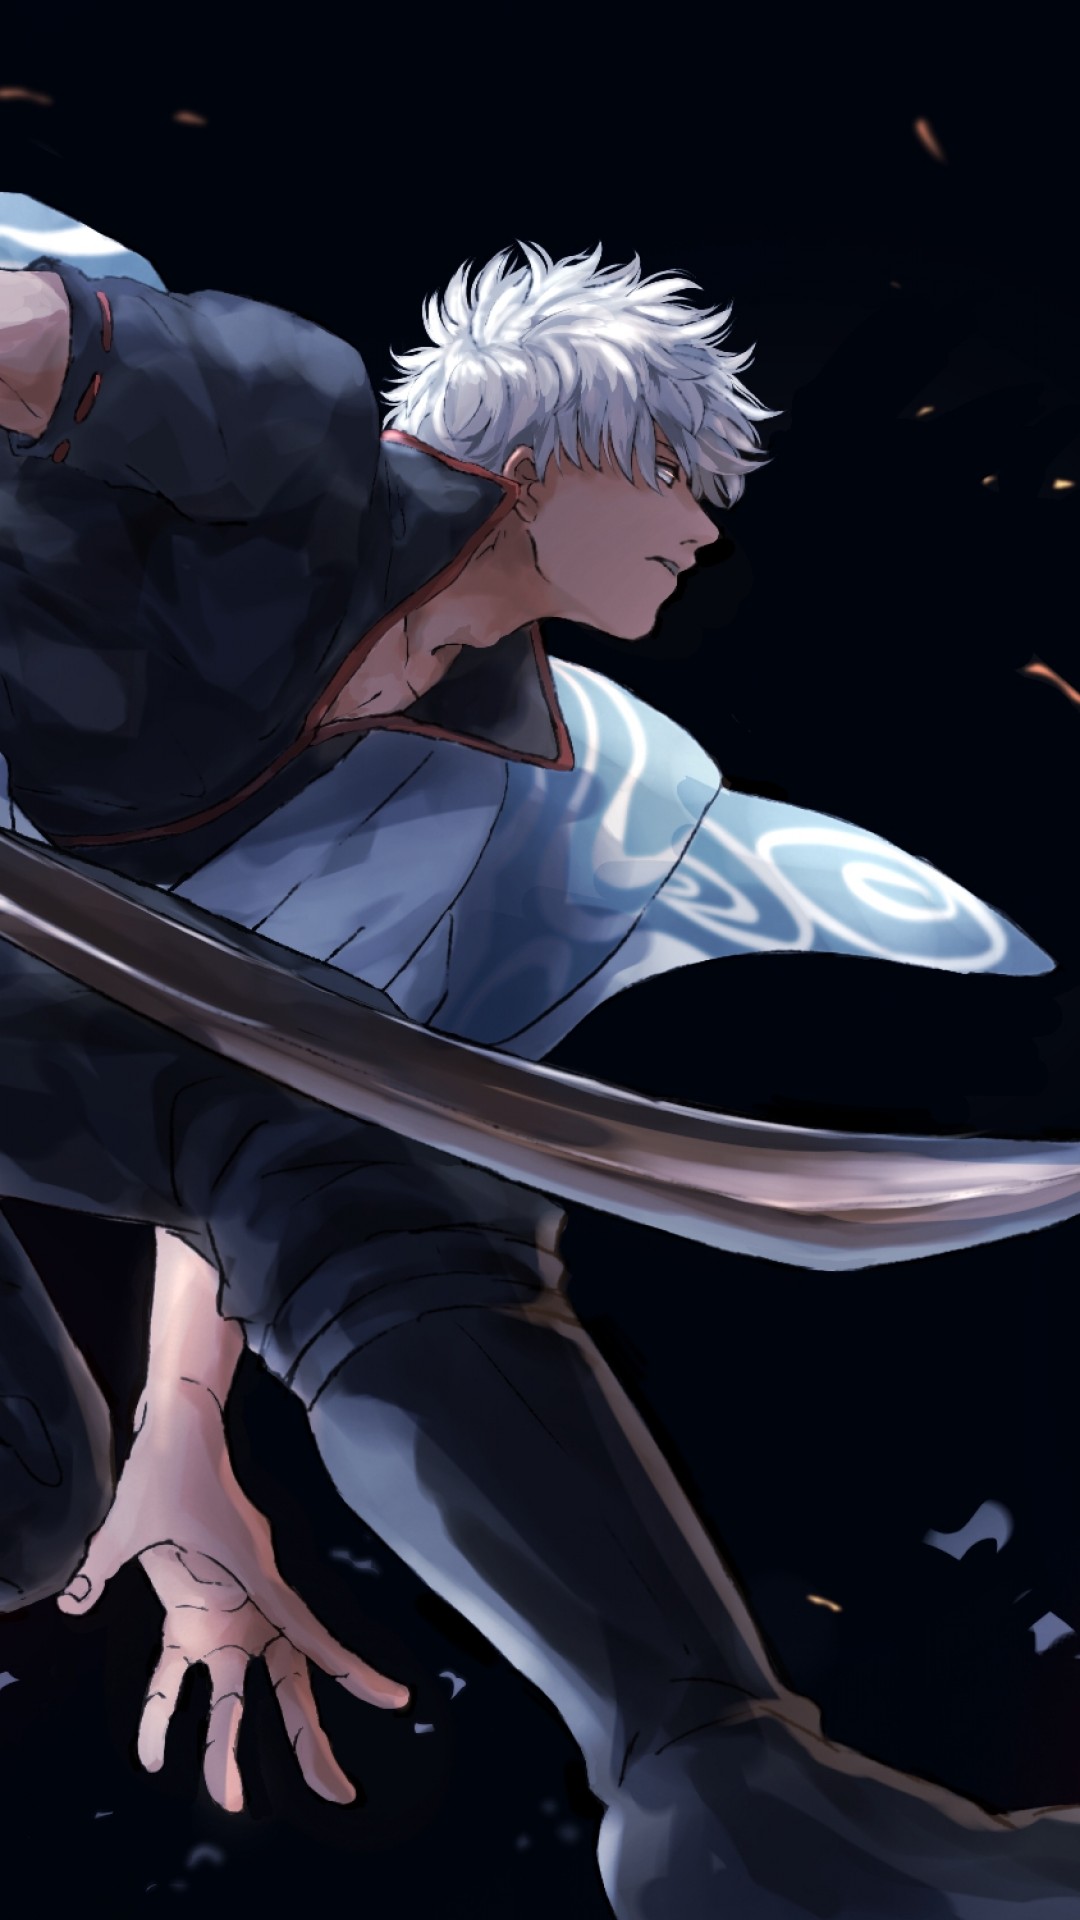 Gintama Anime Iphone Wallpapers Iphone Wallpapers